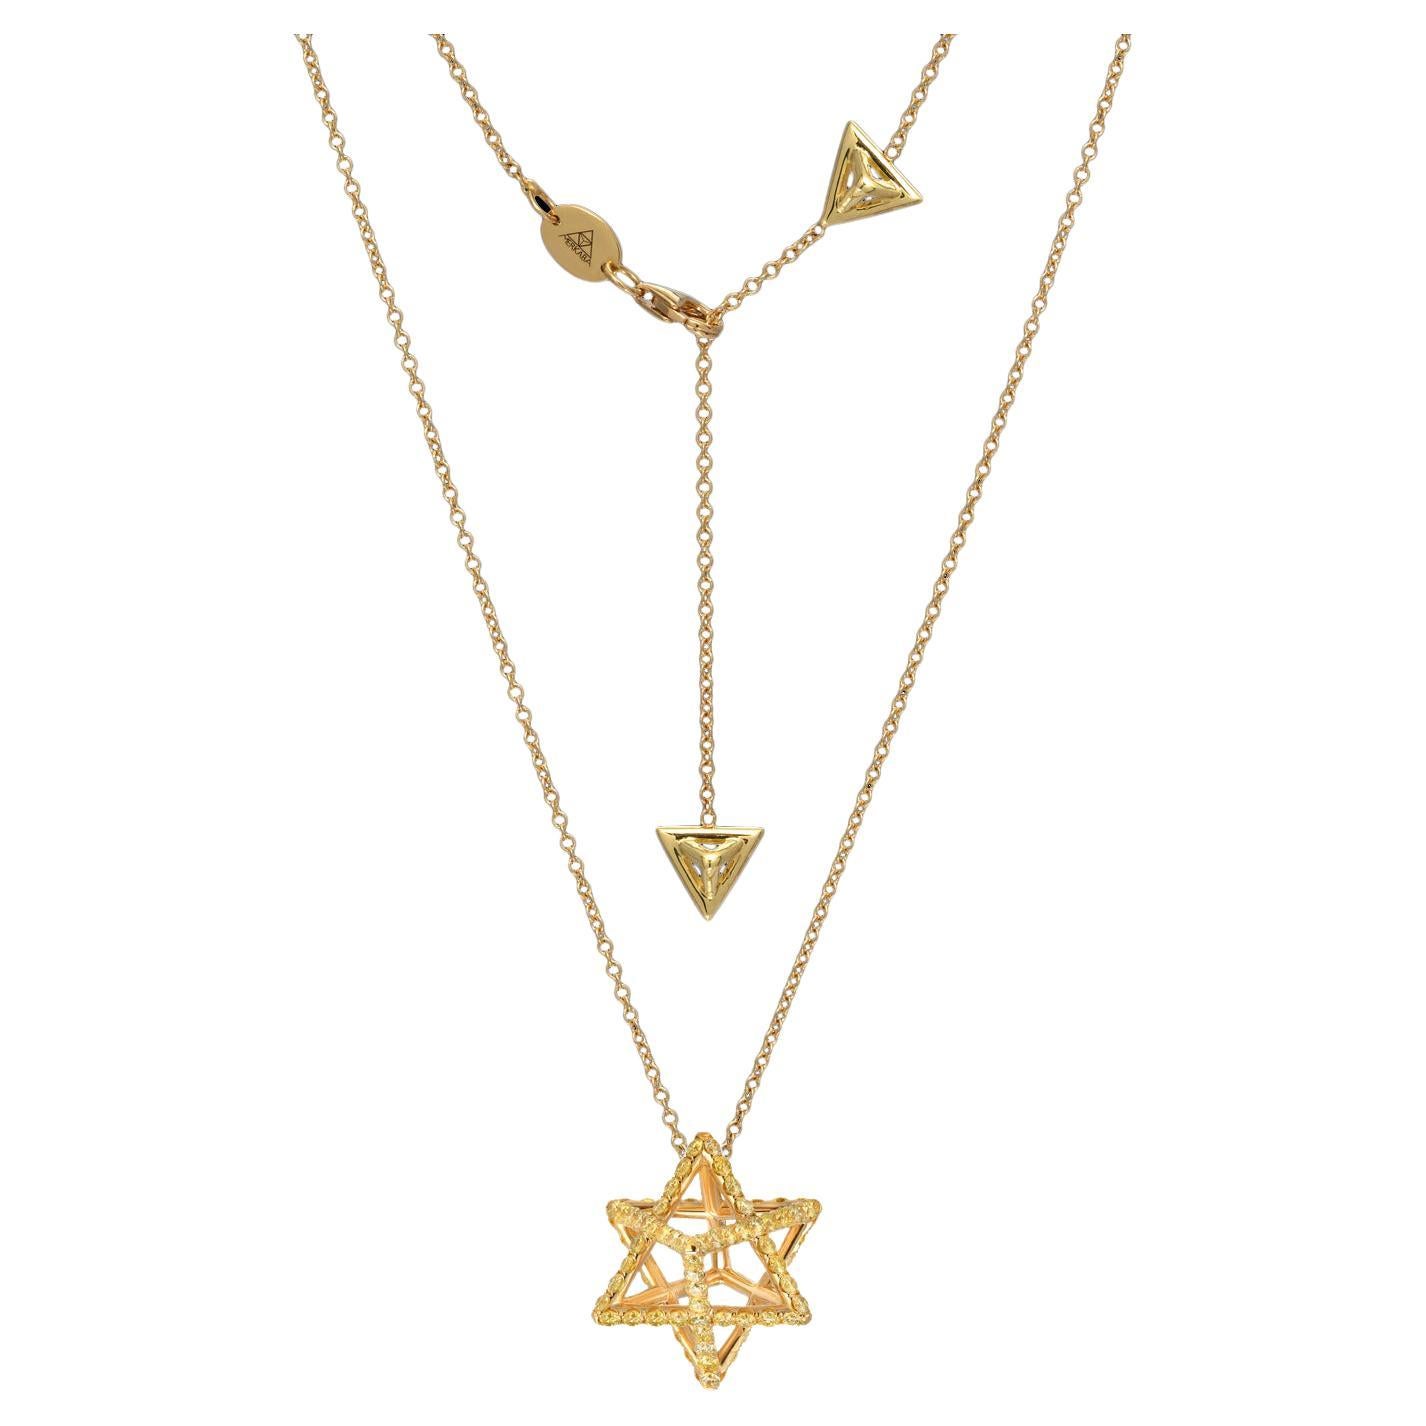 Yellow Diamond Necklace 1.28 Carats Gold Merkaba Star For Sale